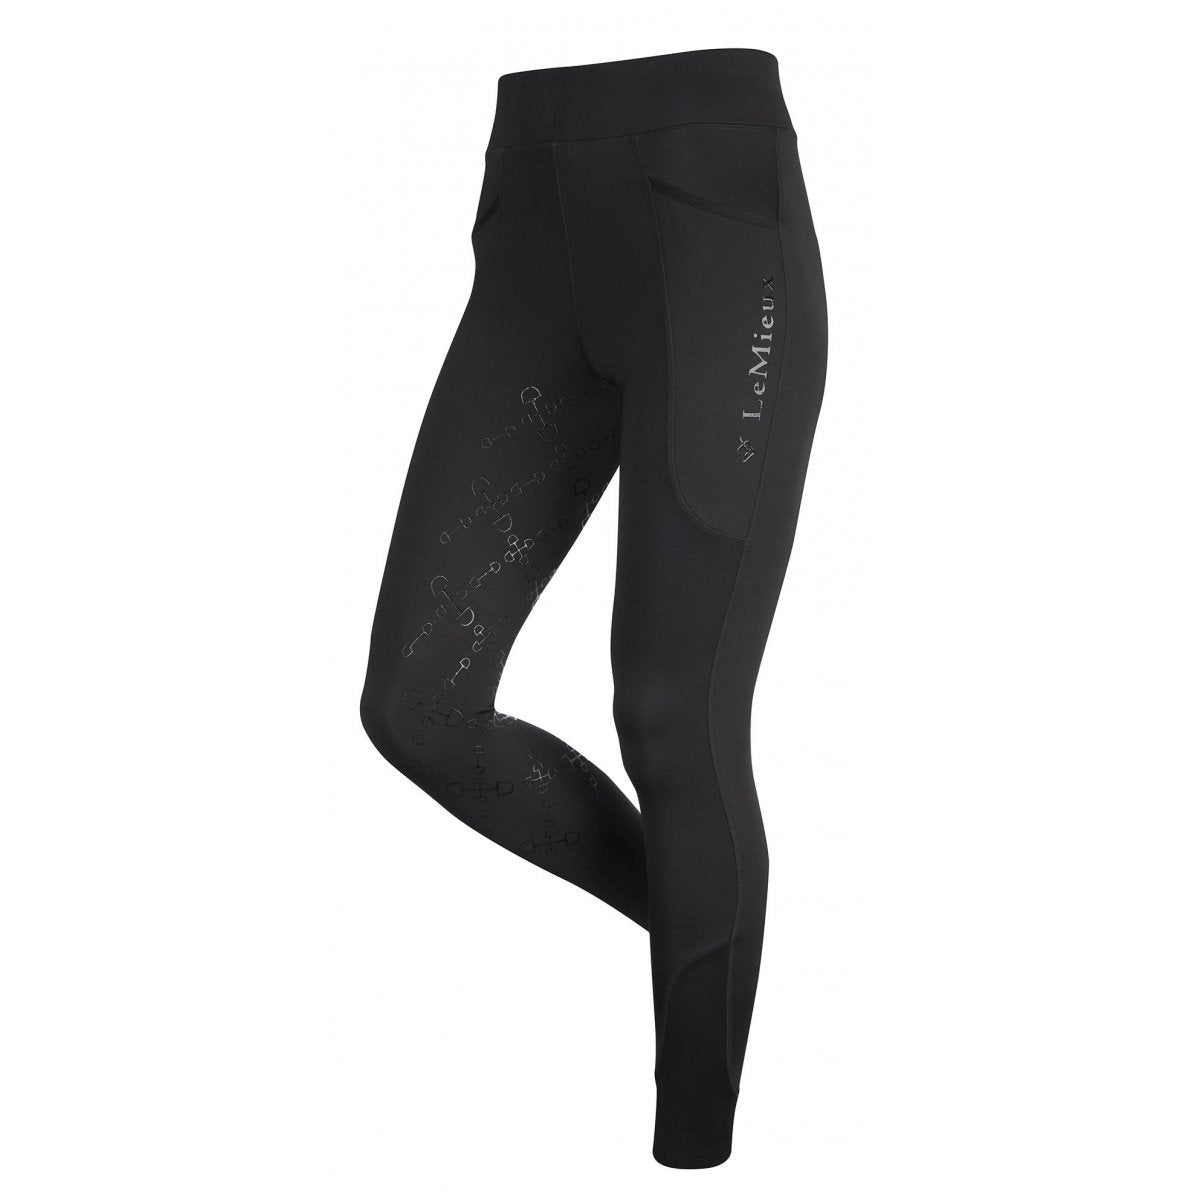 Black Horse Riding Tights with logo, pocket detail, and contoured fit.